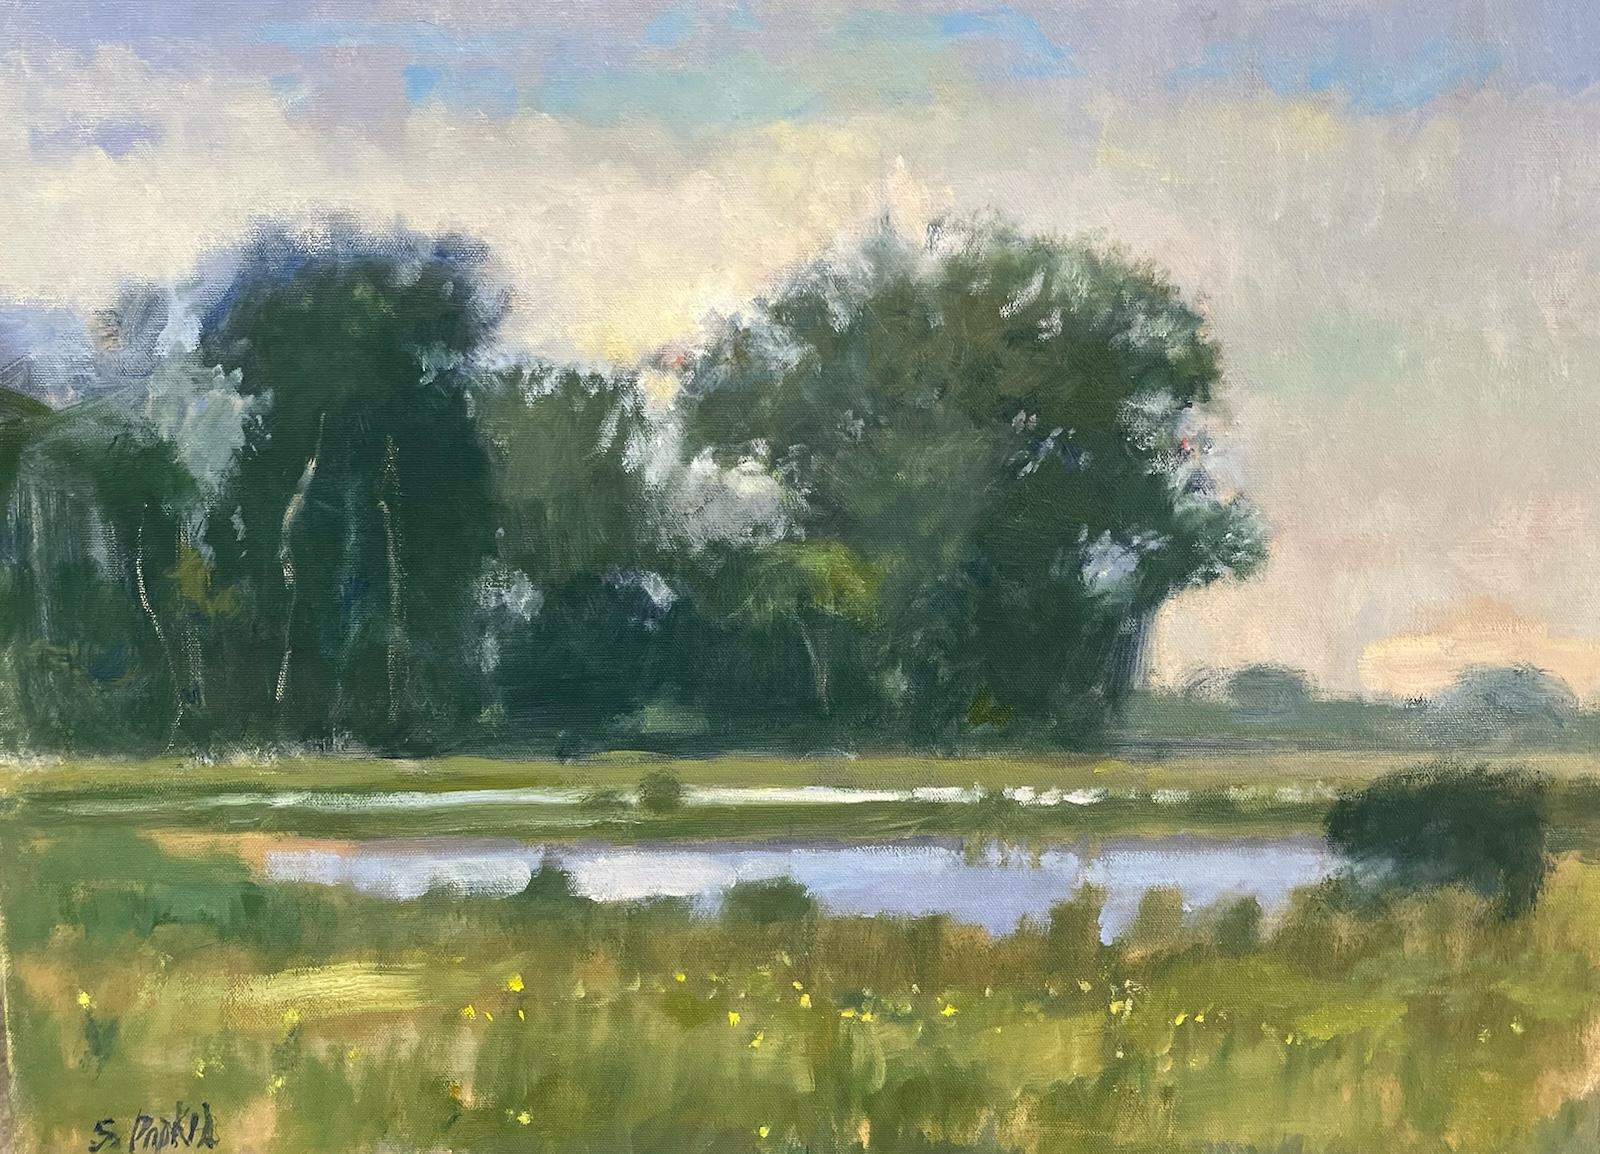 Steve Parker Landscape Painting - George Ranch  Texas Landscape  Oil  American Impressionism  Light and Shadow 